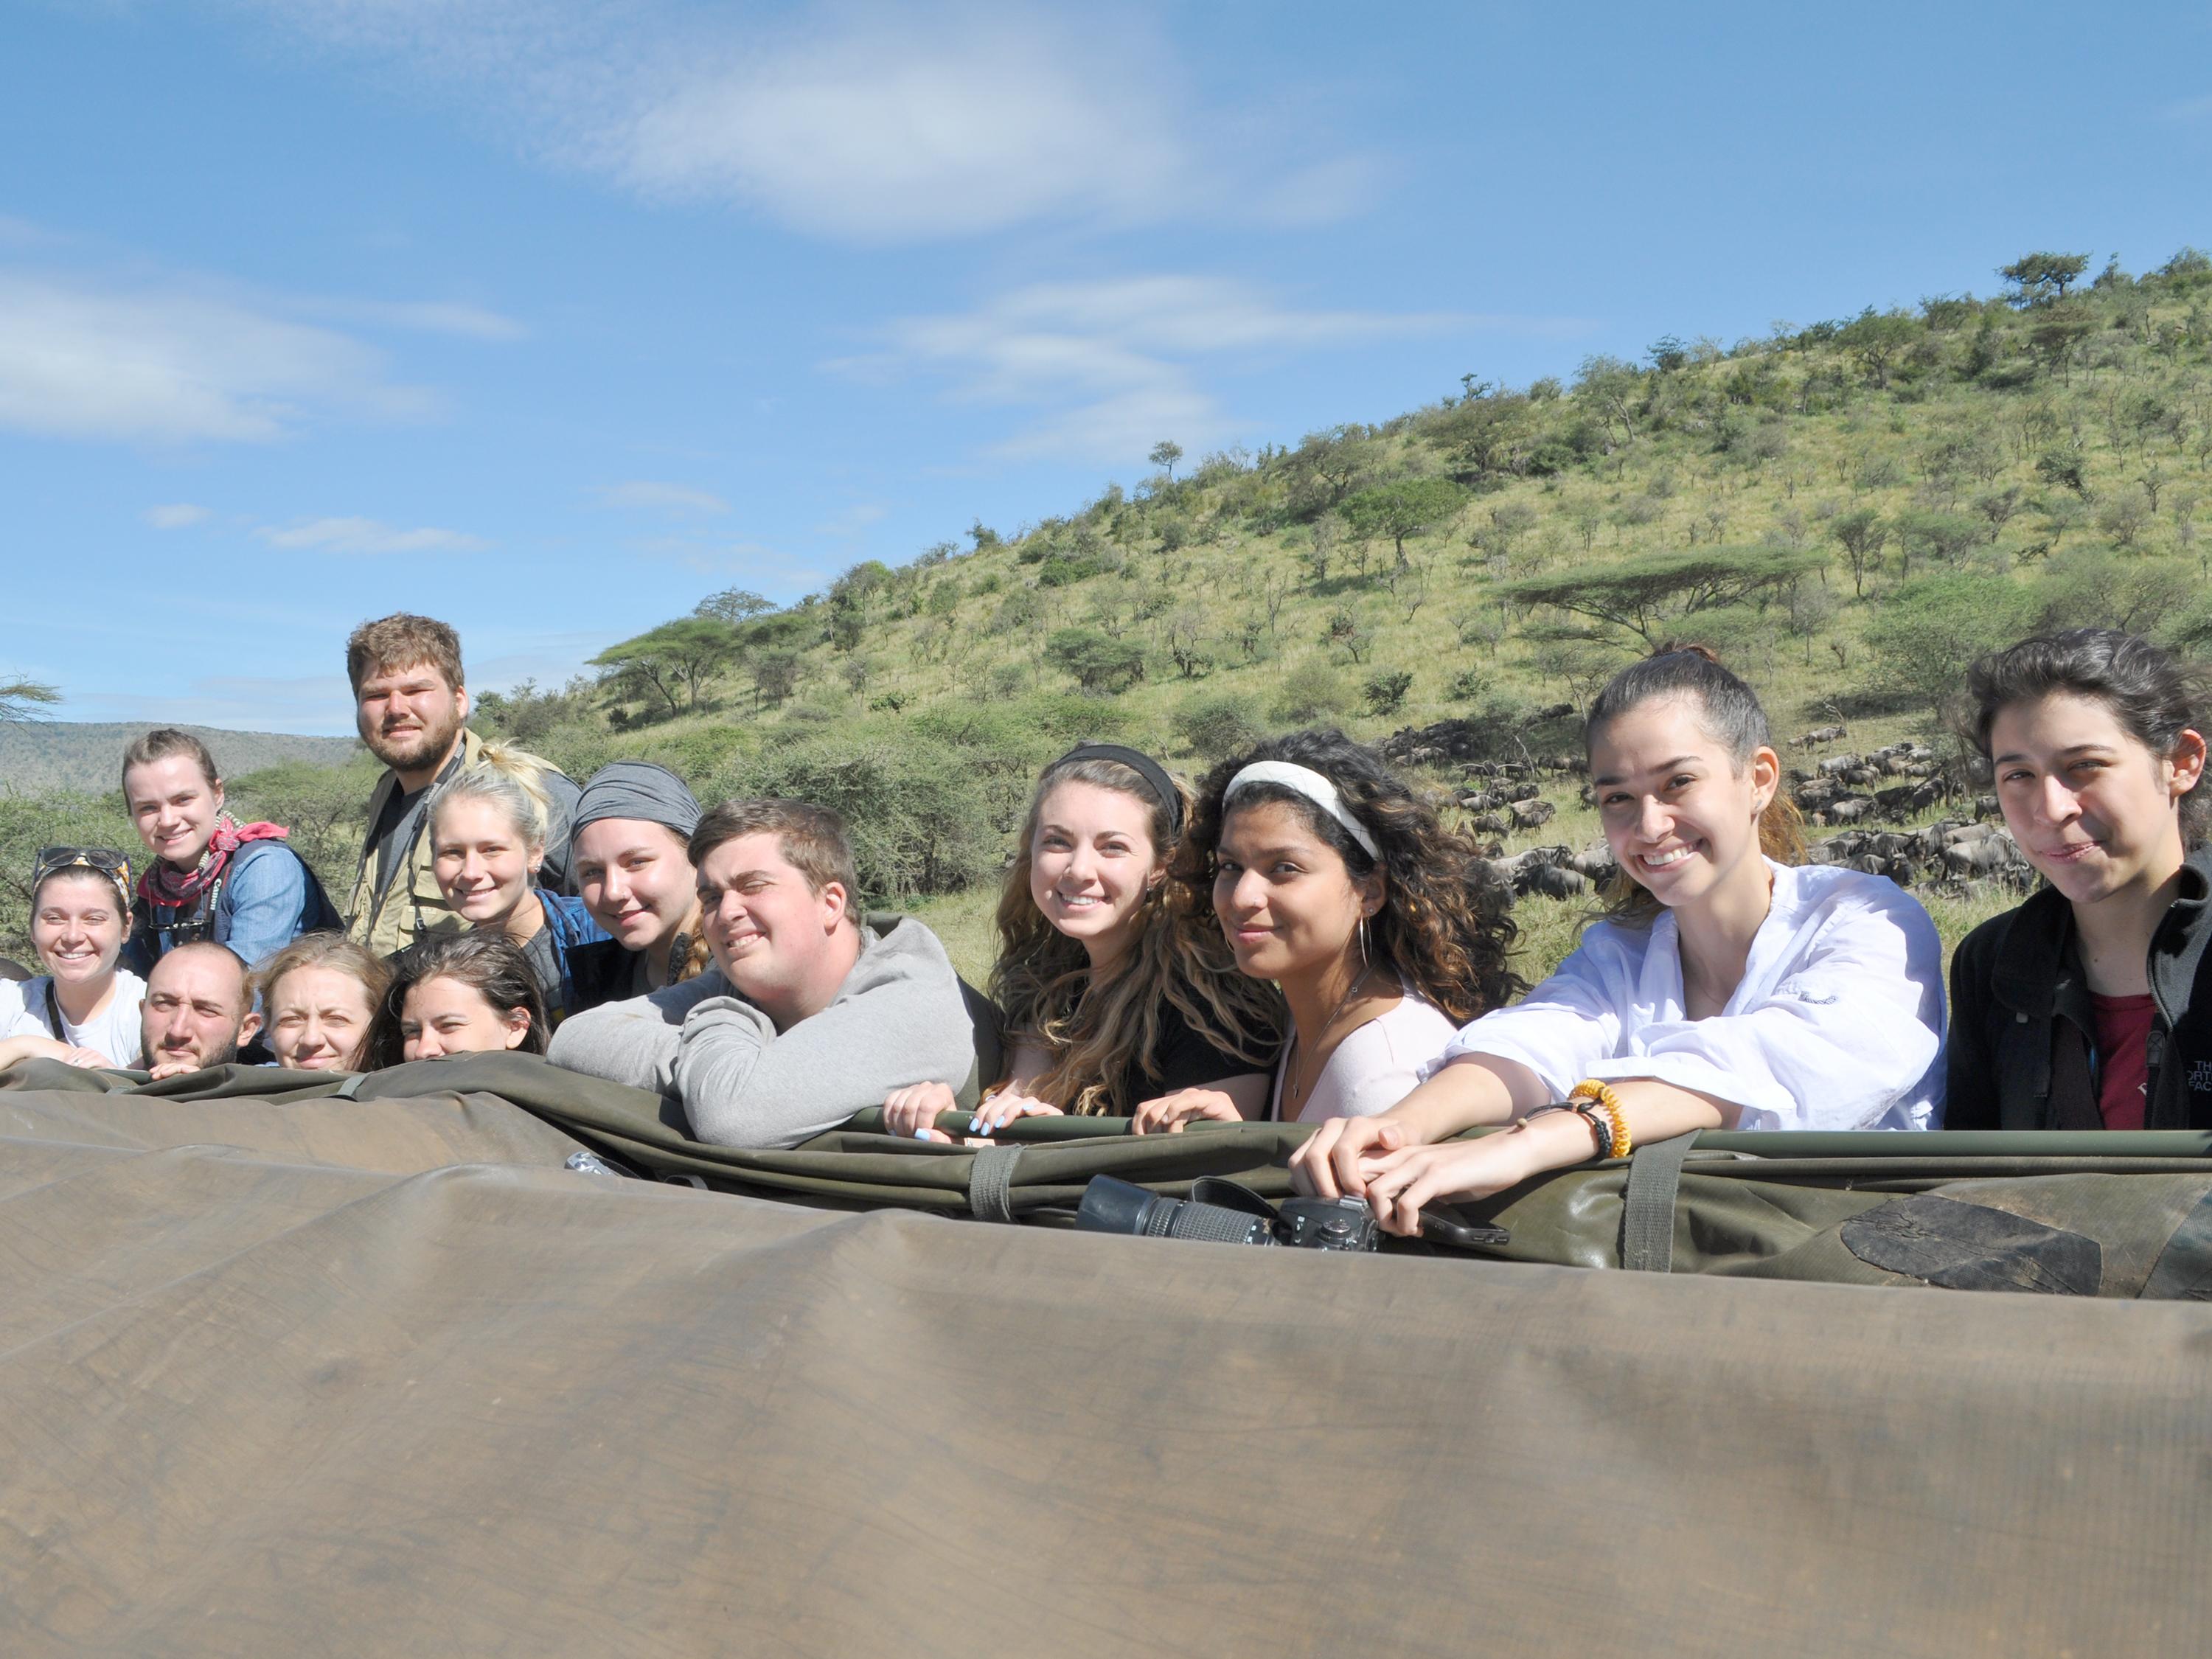 Students learning by traveling across Tanzania